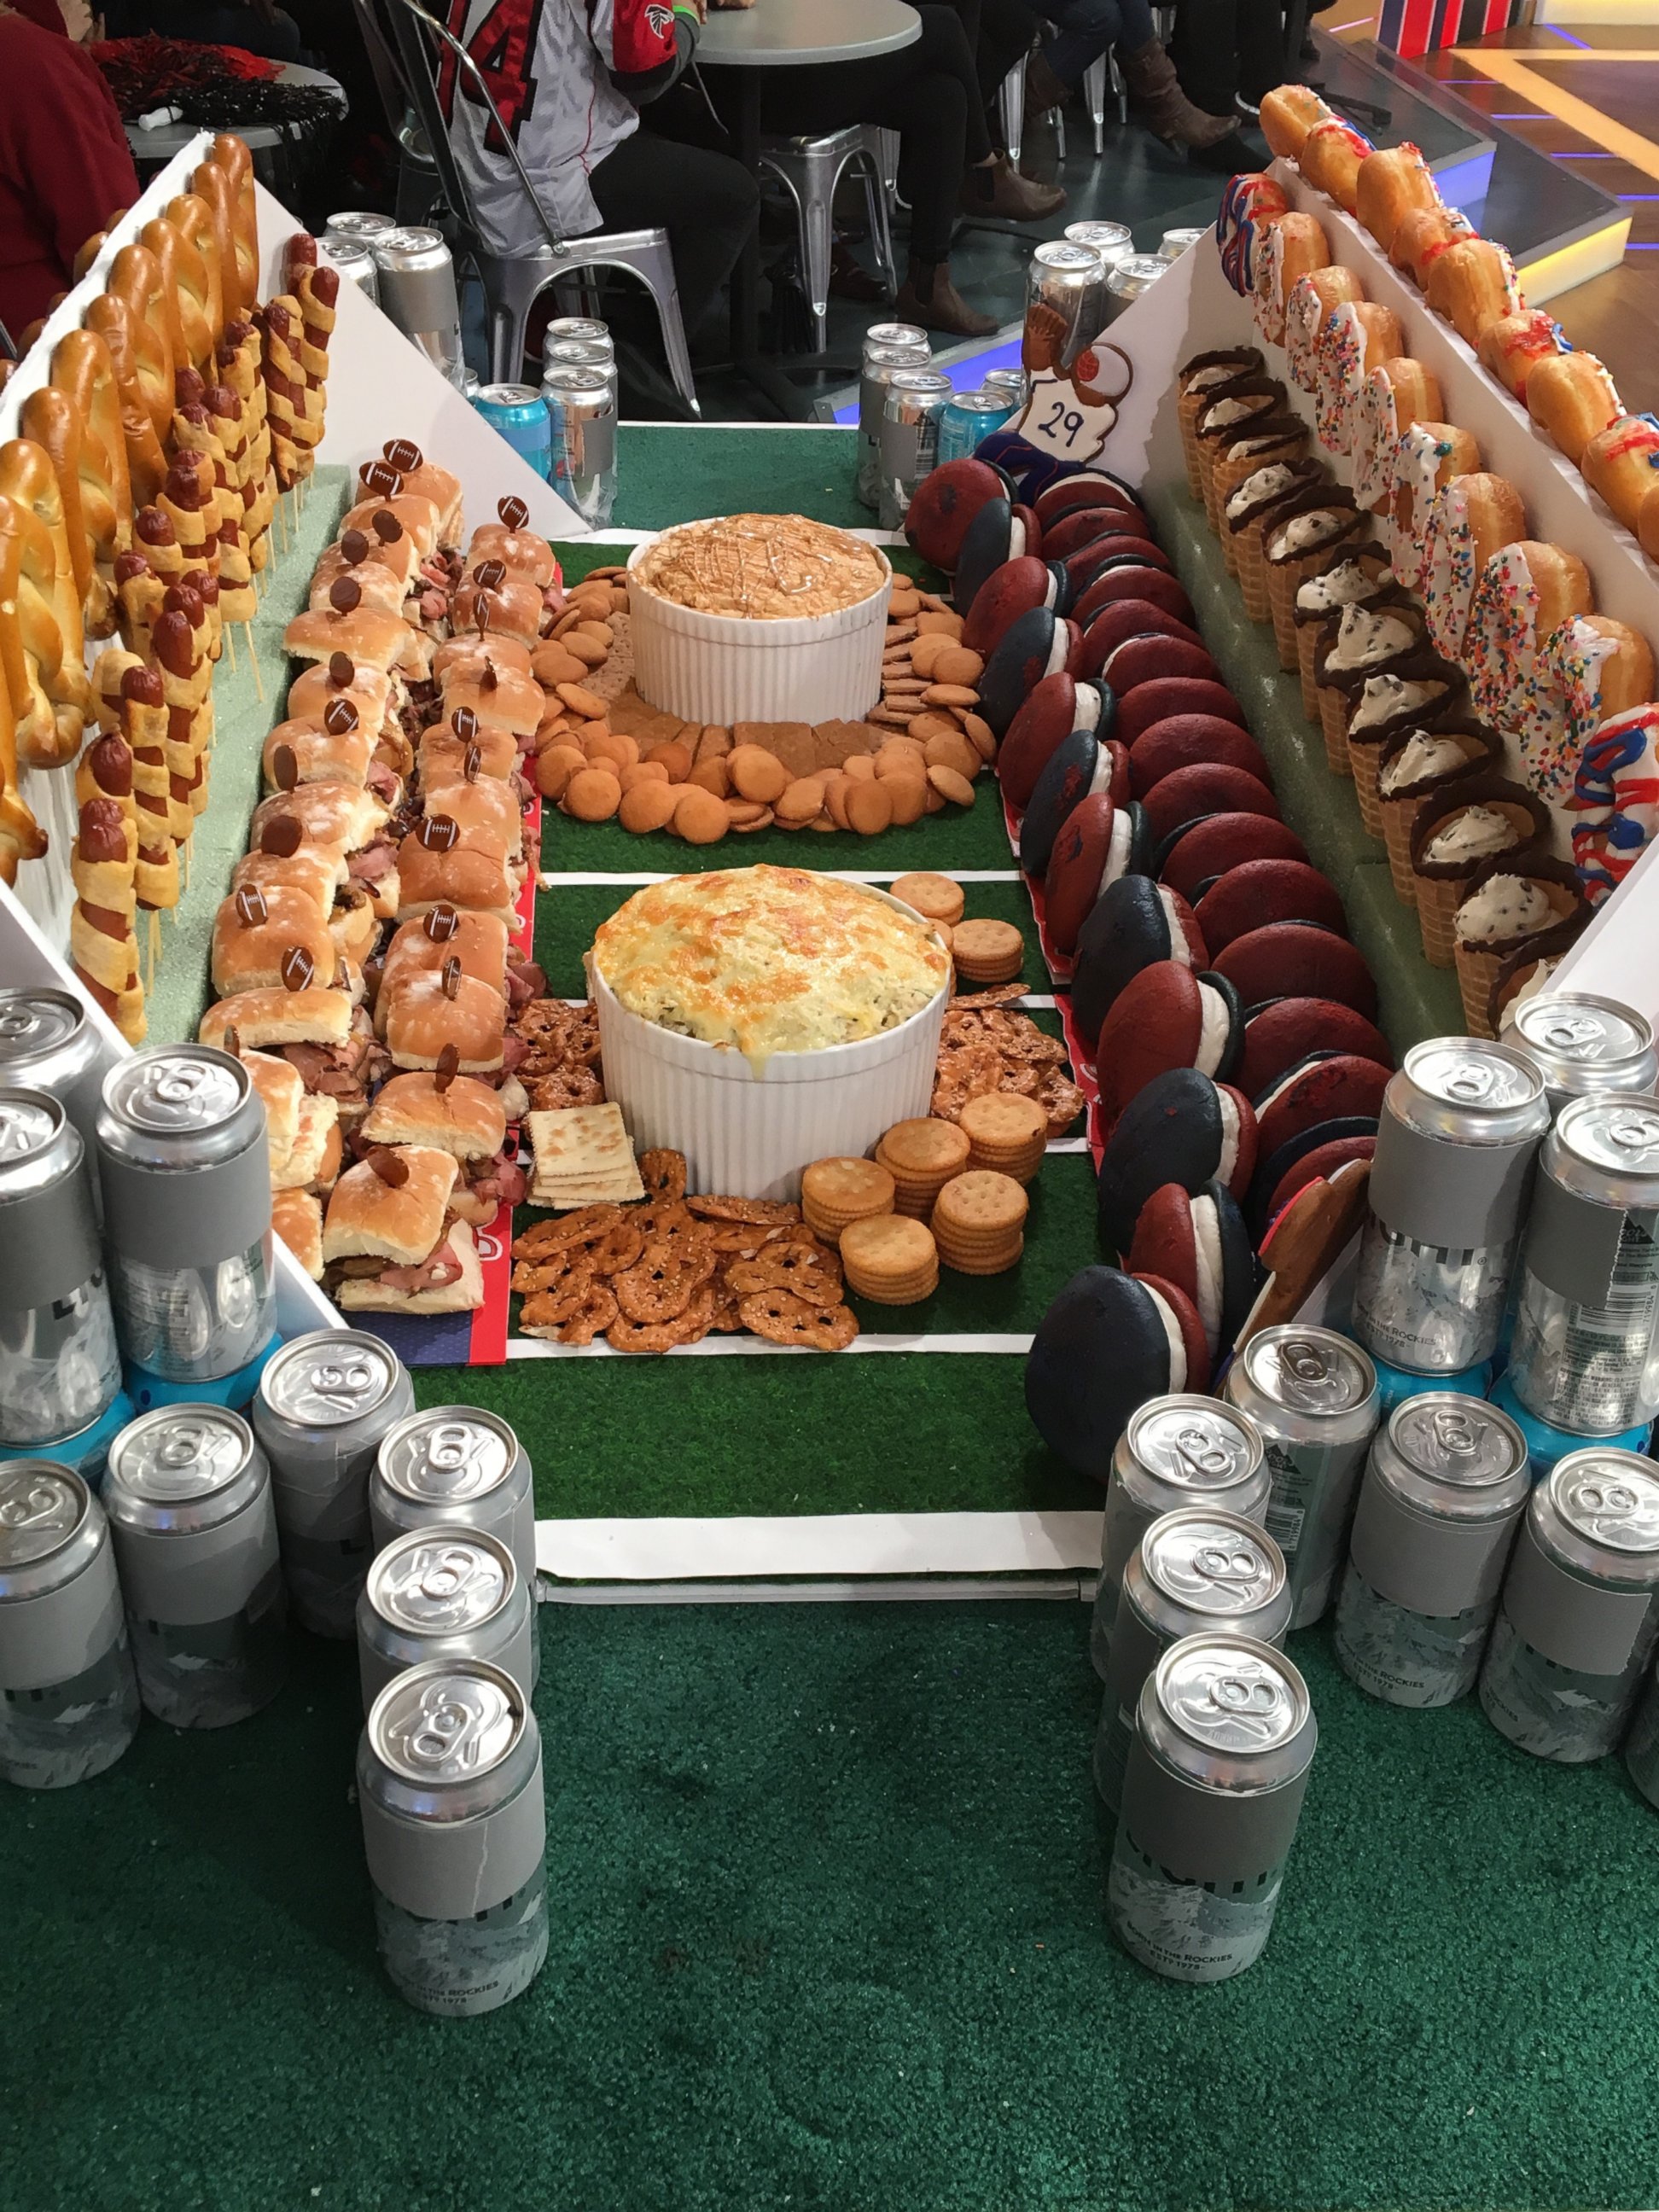 PHOTO: Get inspiration to build your own ultimate, edible snack football stadium with a Falcons-theme or Patriots-theme stadium from Delish.com editors.